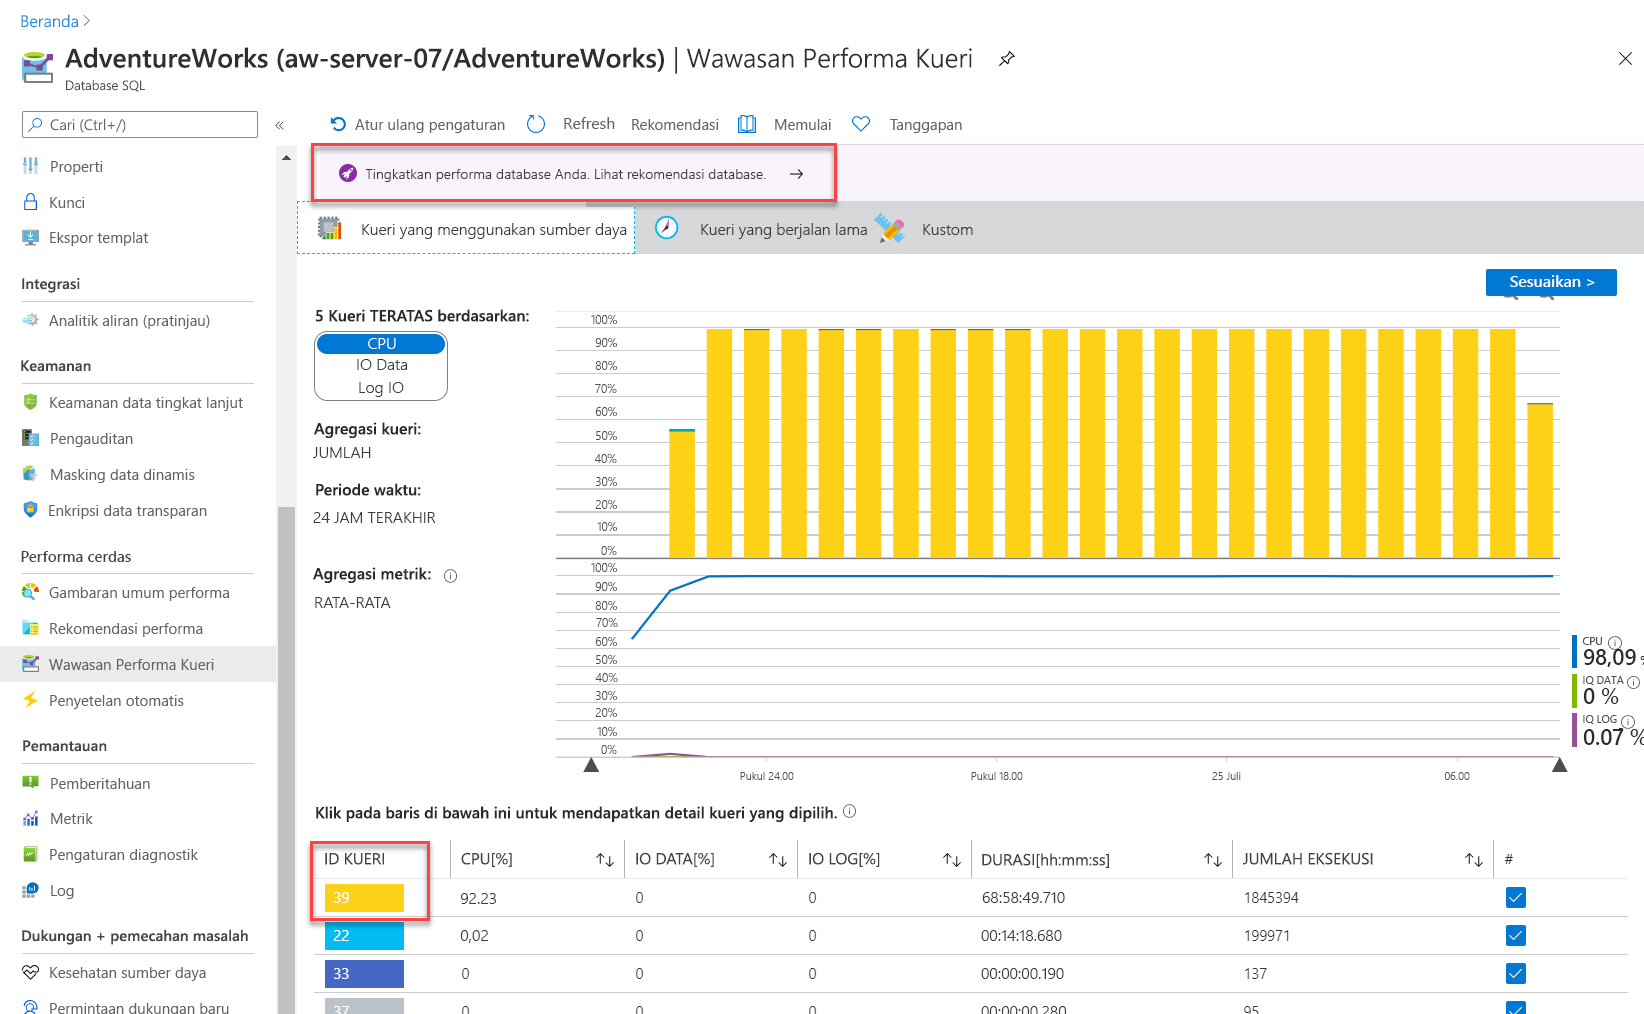 Screenshot of Query Performance Insights.